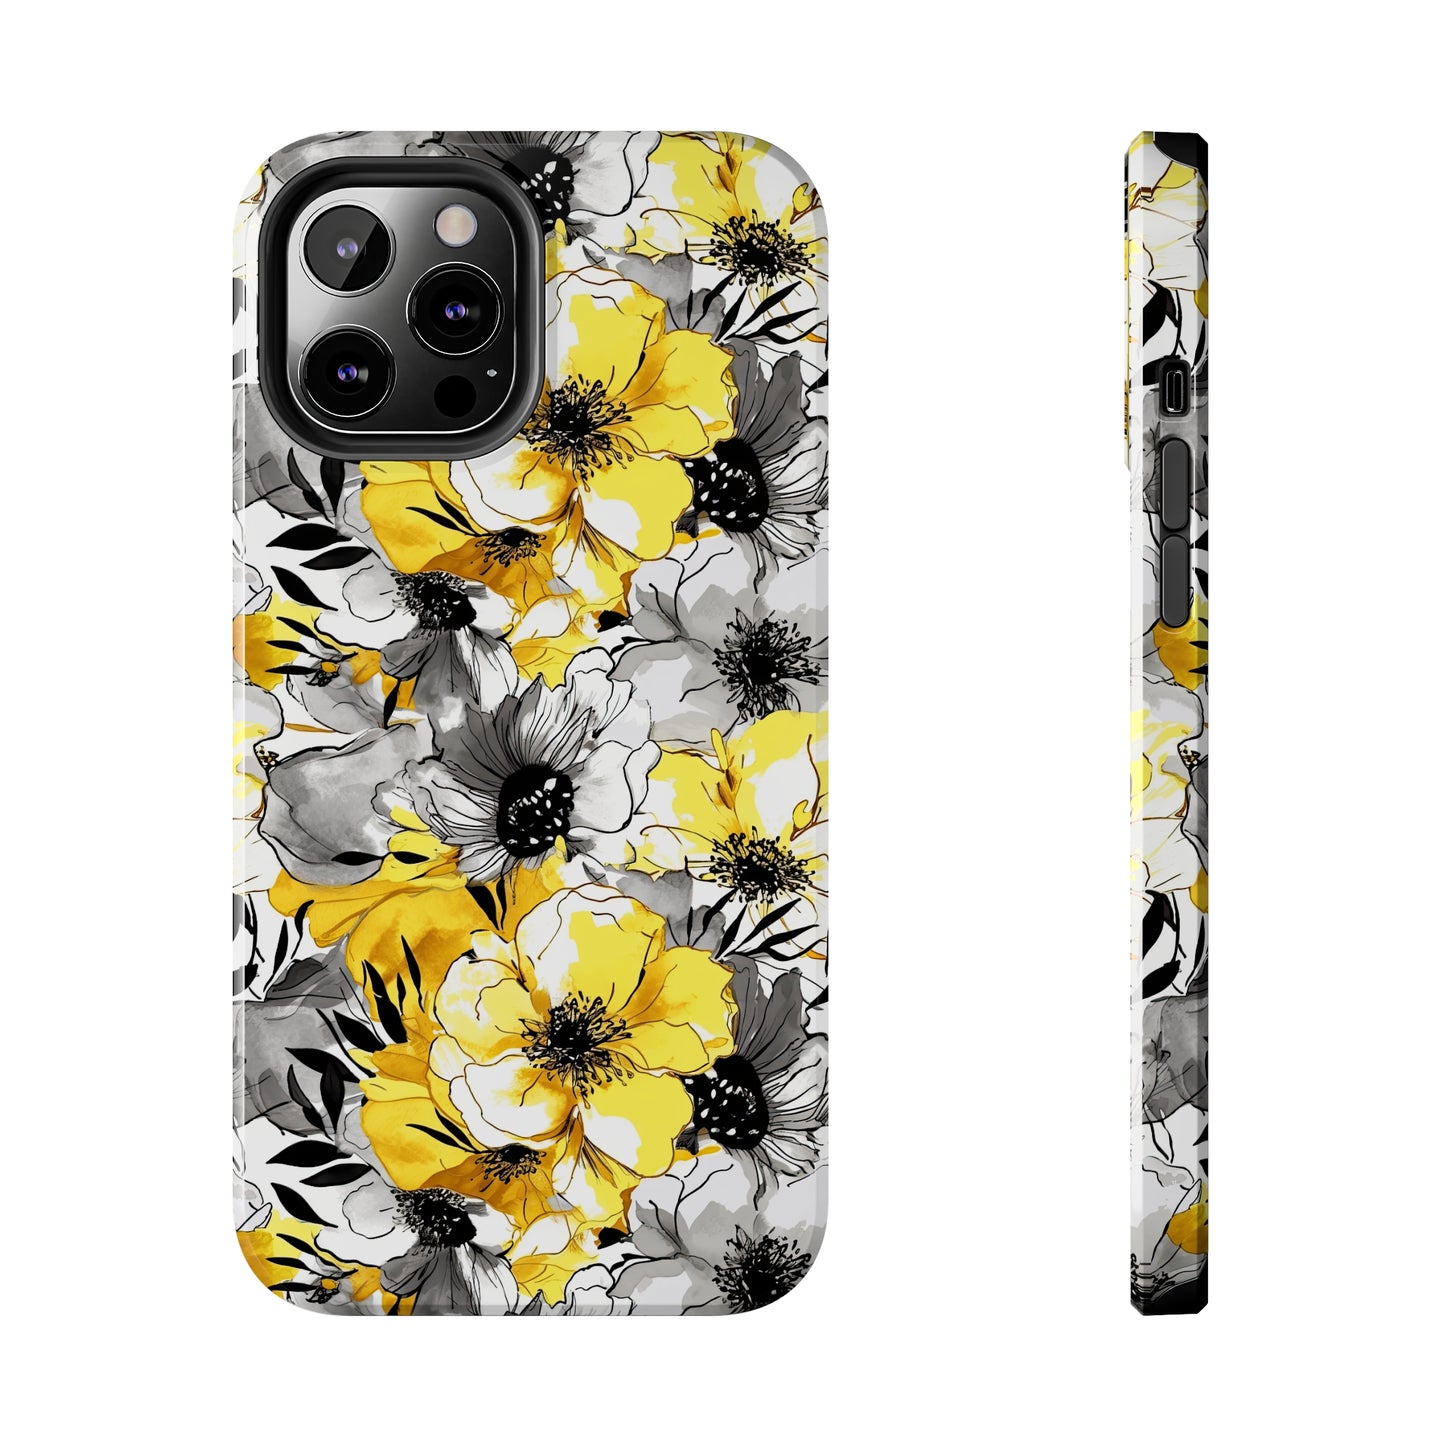 Soothing Radiance: Large Yellow and Grey Watercolor Flower Design Iphone Tough Phone Case